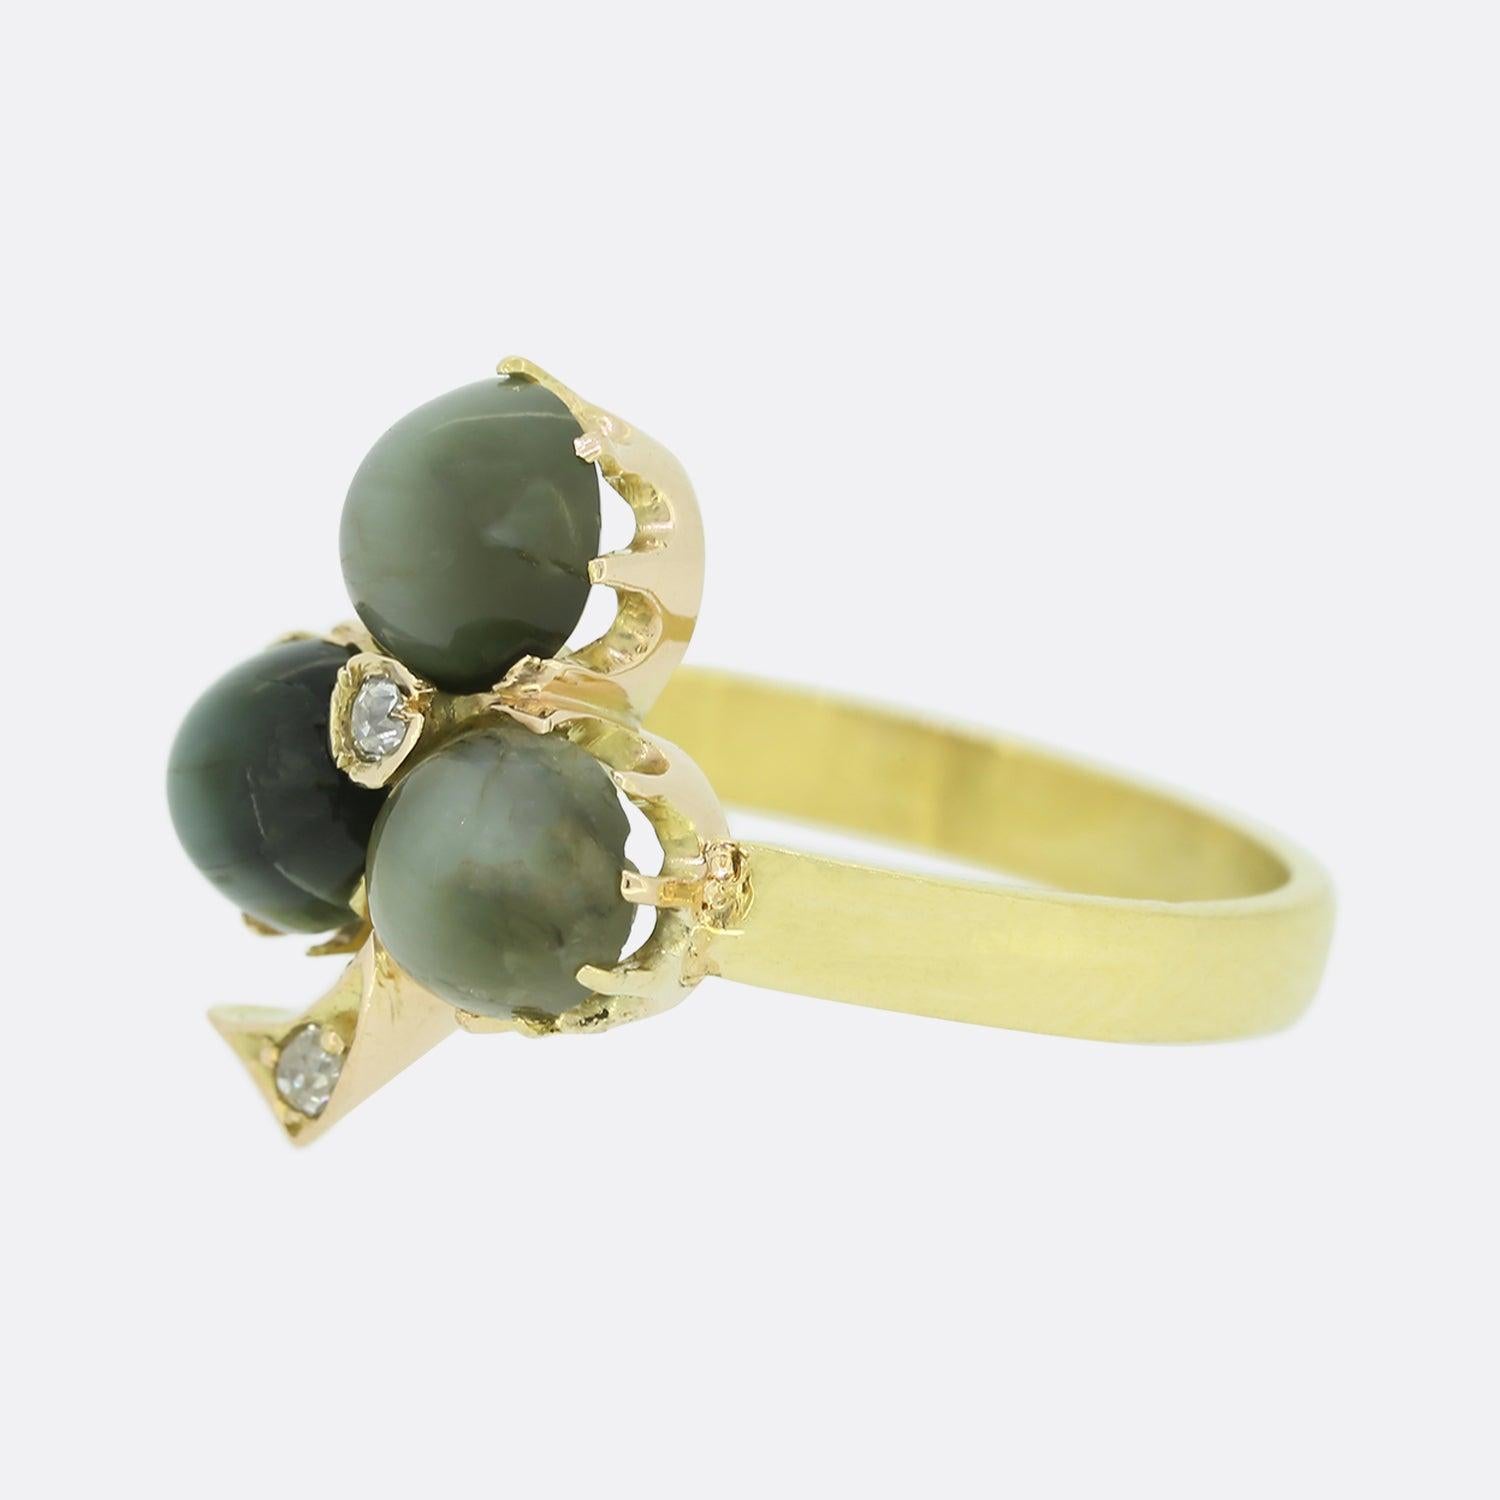 This is a charming Victorian diamond and chrysoberyl cats eye clover ring. The ring is set with a trio of round cabochon cats eye chrysoberyl with a central old cut diamond. The ring has been crafted in 18ct yellow gold with a plain polished band.